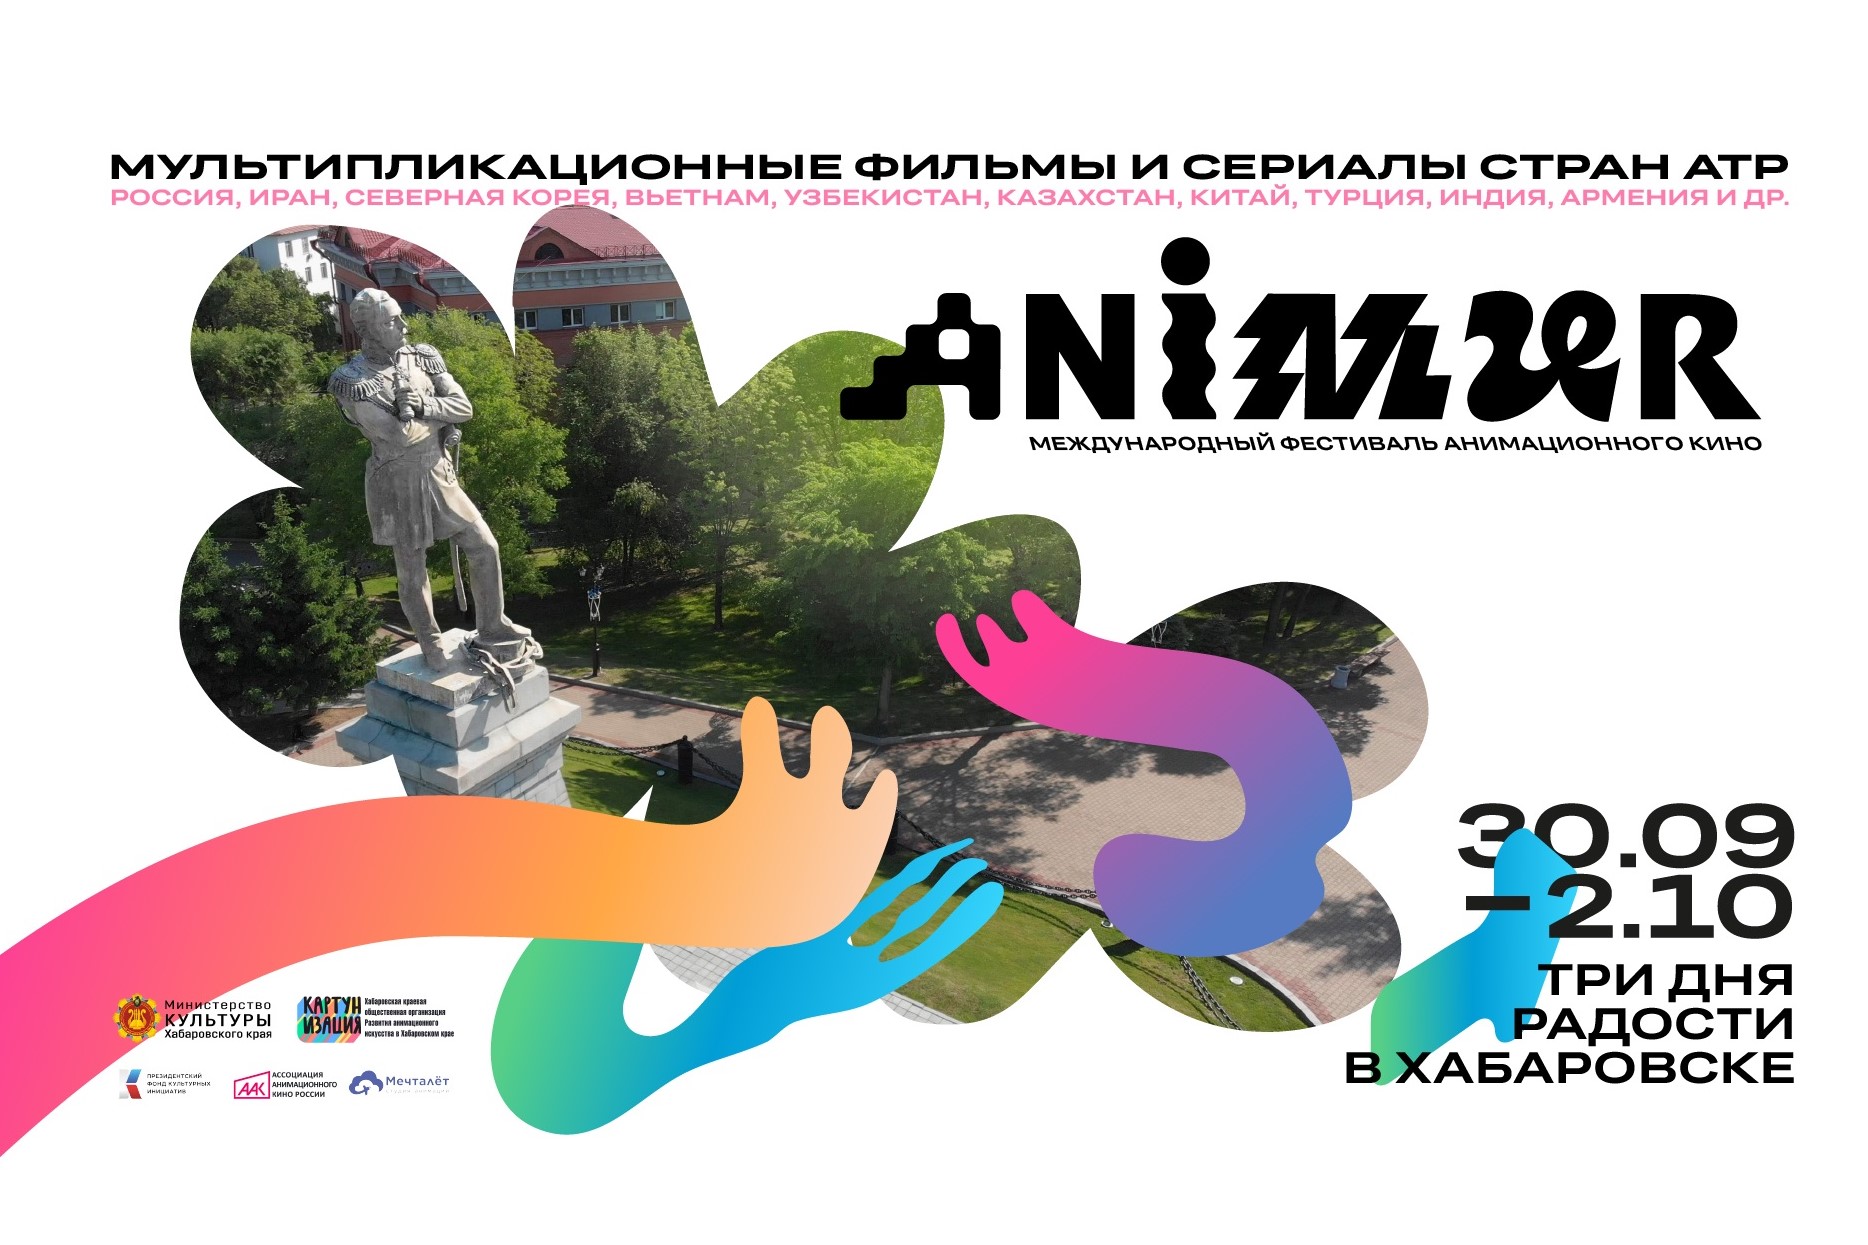 For the first time in the Far East, the International Animation Festival!